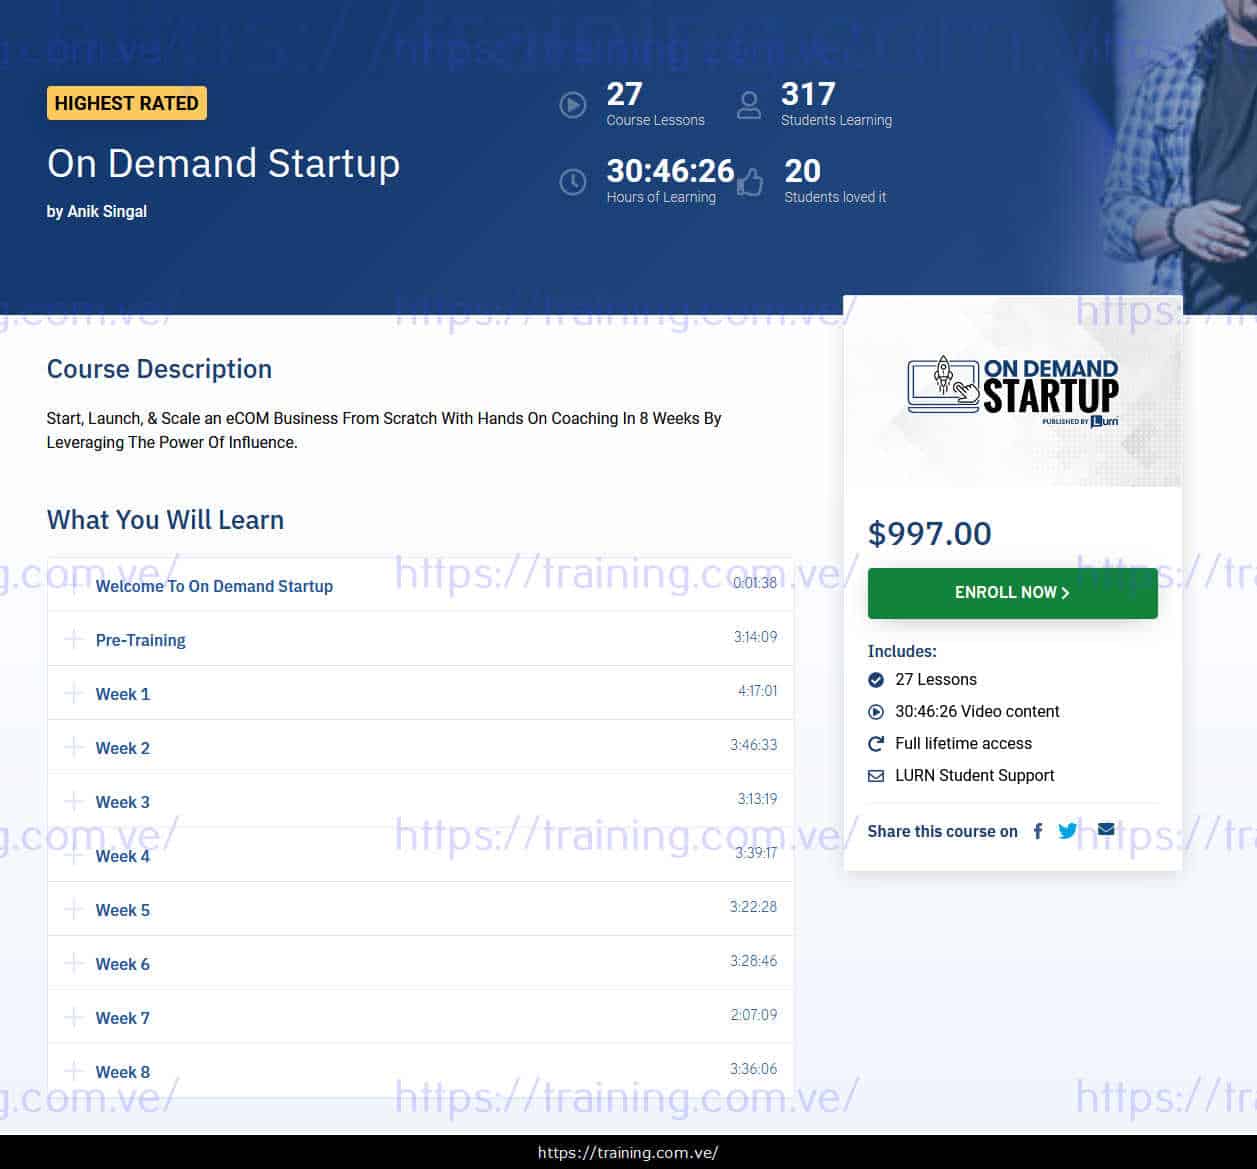 On Demand Startup by Anik Singal sales page